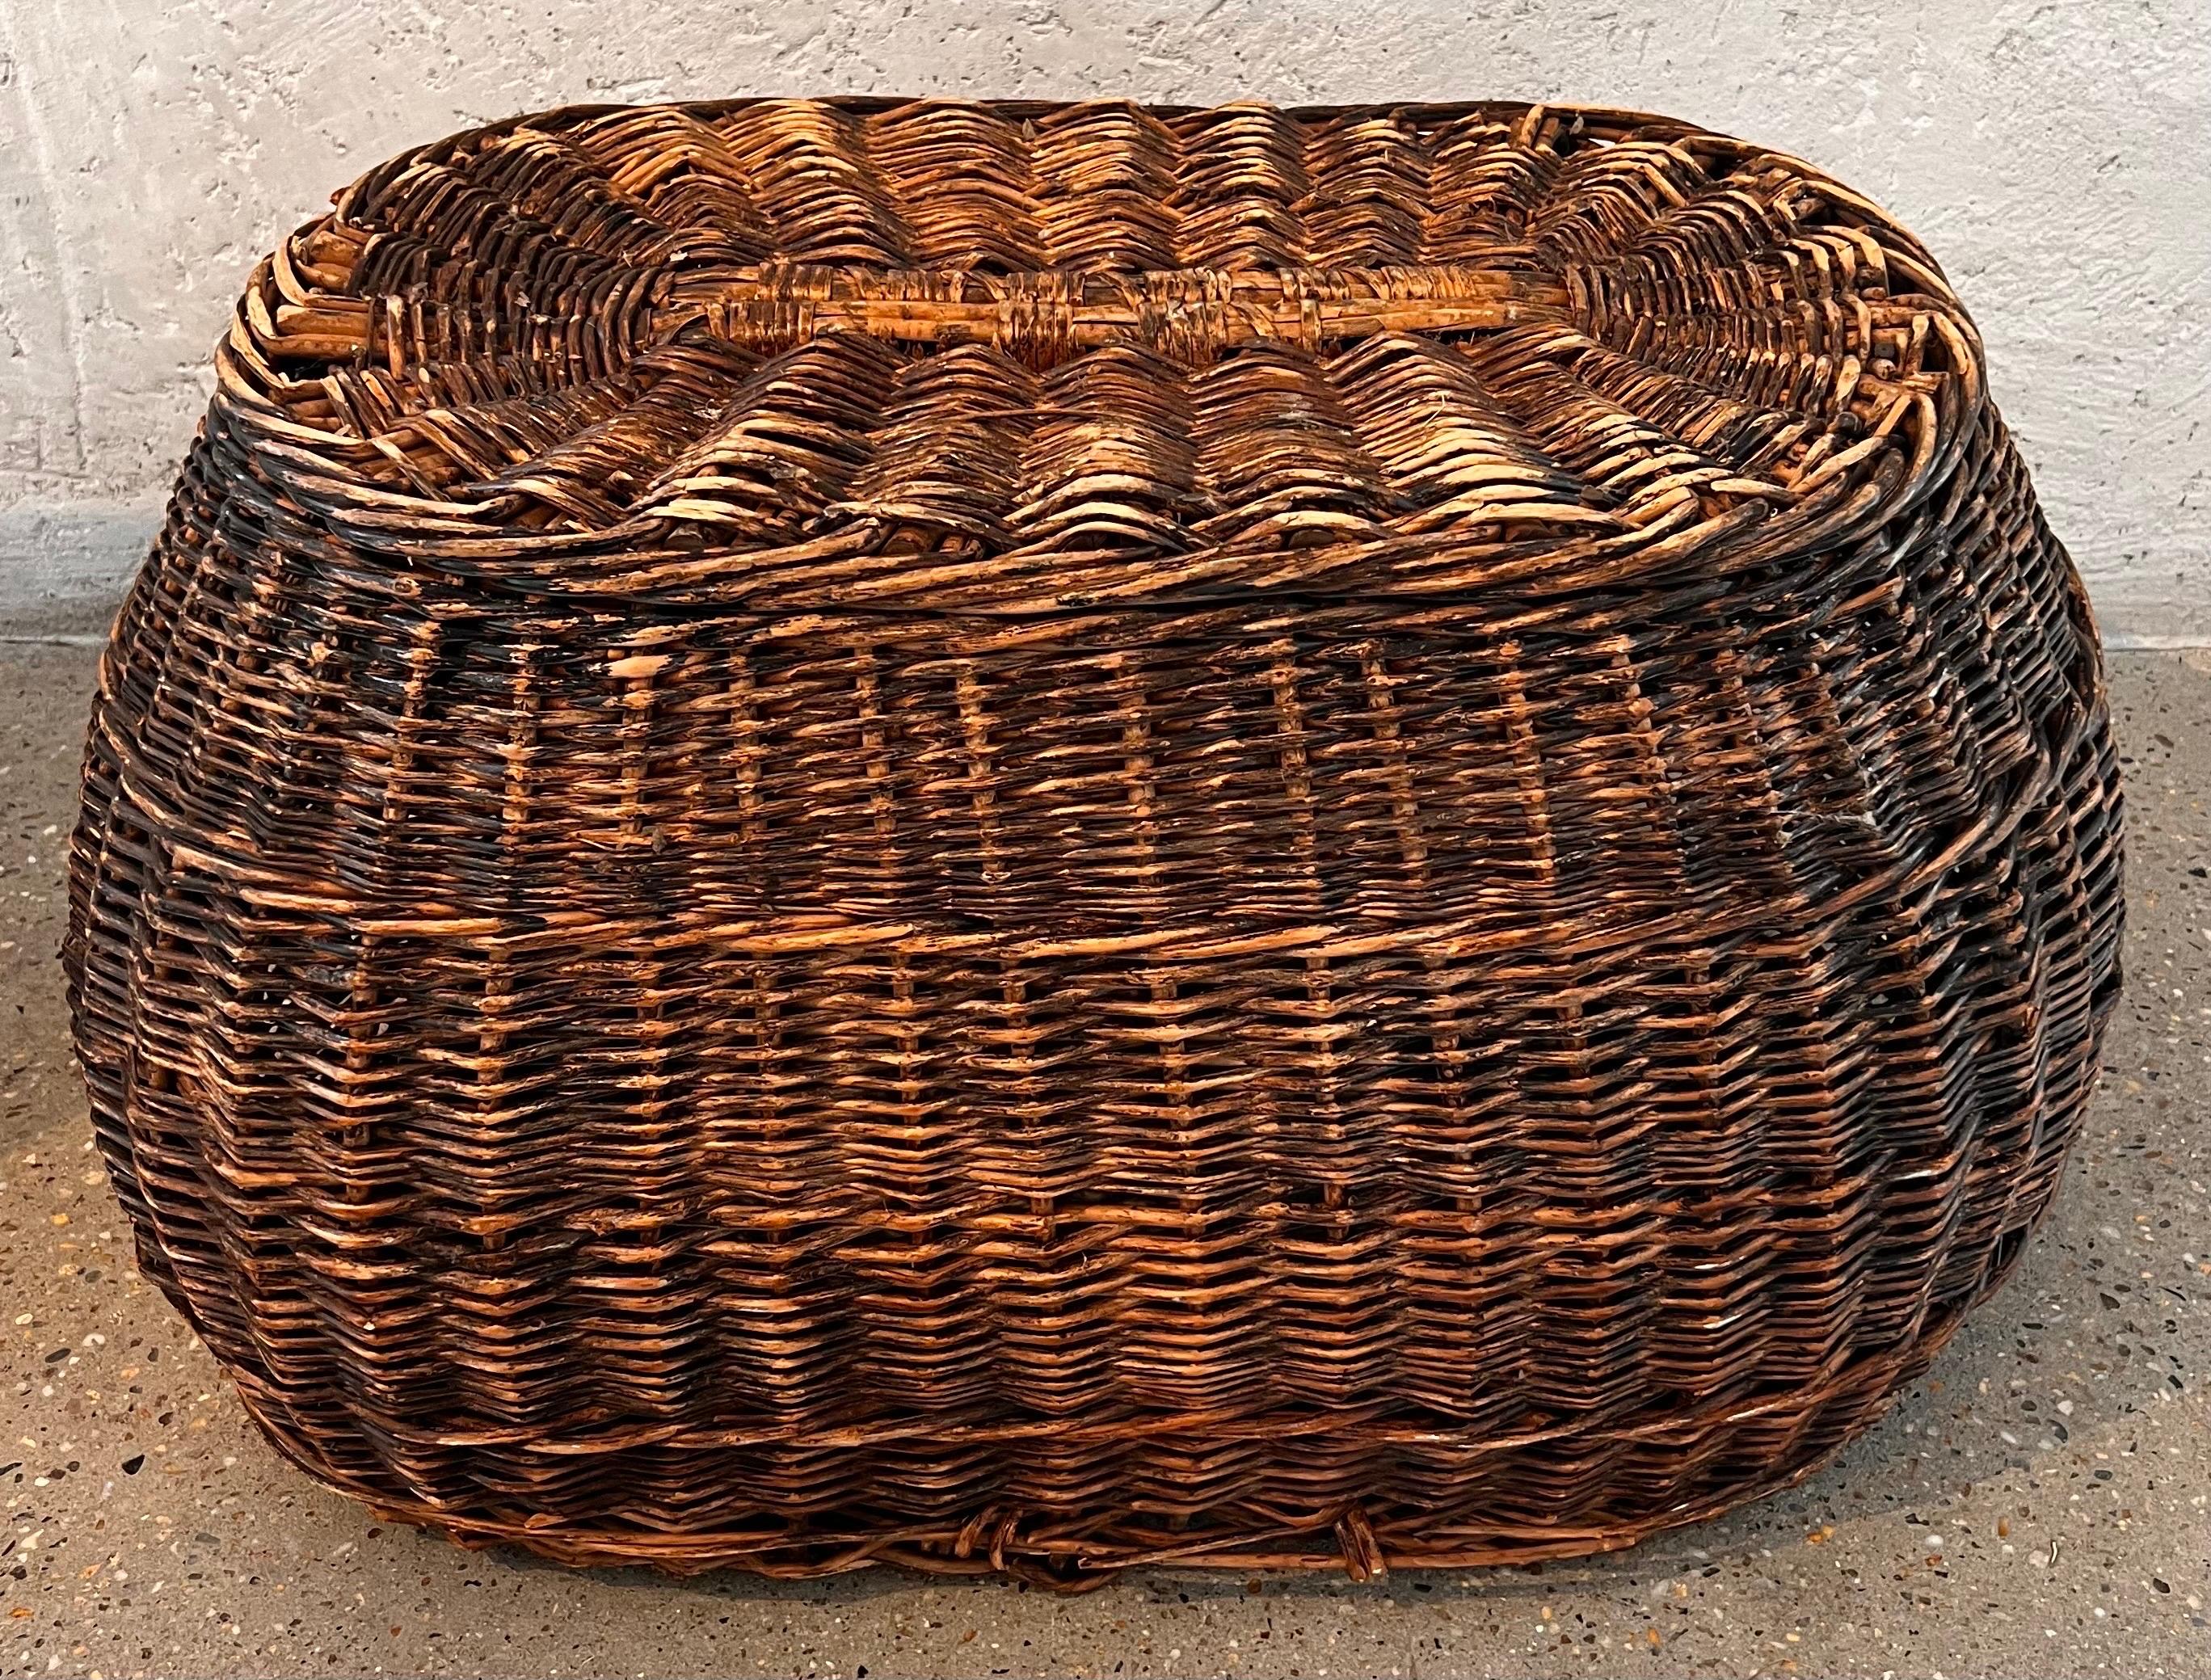 The Basket was hand woven in the 1800s and over time the top edge has seen a bit of damage although, the breakage is quite elegant and runs only along the top top. 
The rest of the basket is sturdy and beautiful.